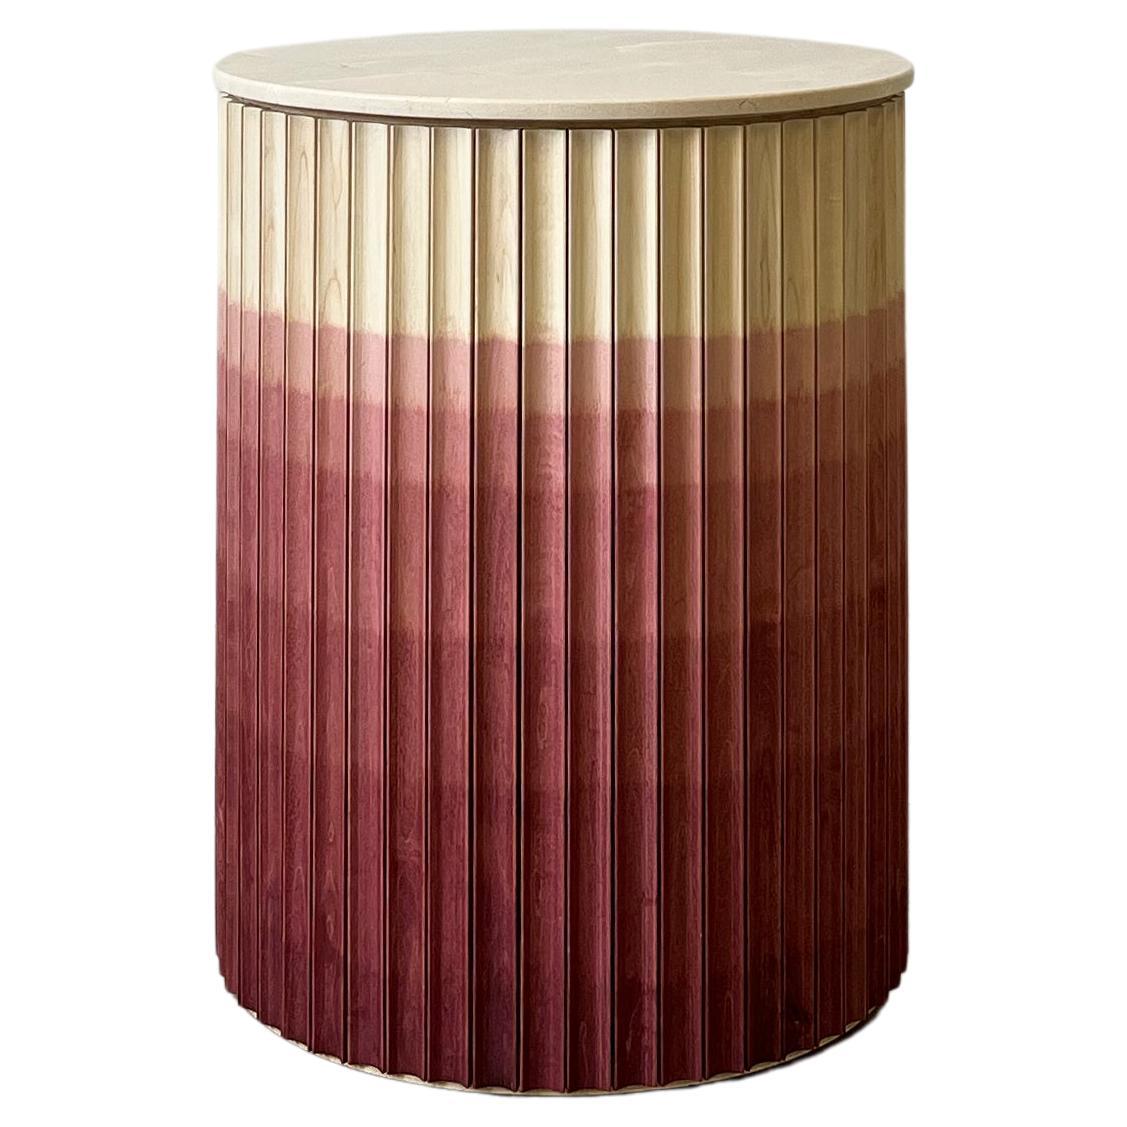 Pilar Round End Table / Copper Red Ombré Maple Wood / Crema Marble Top by INDO-